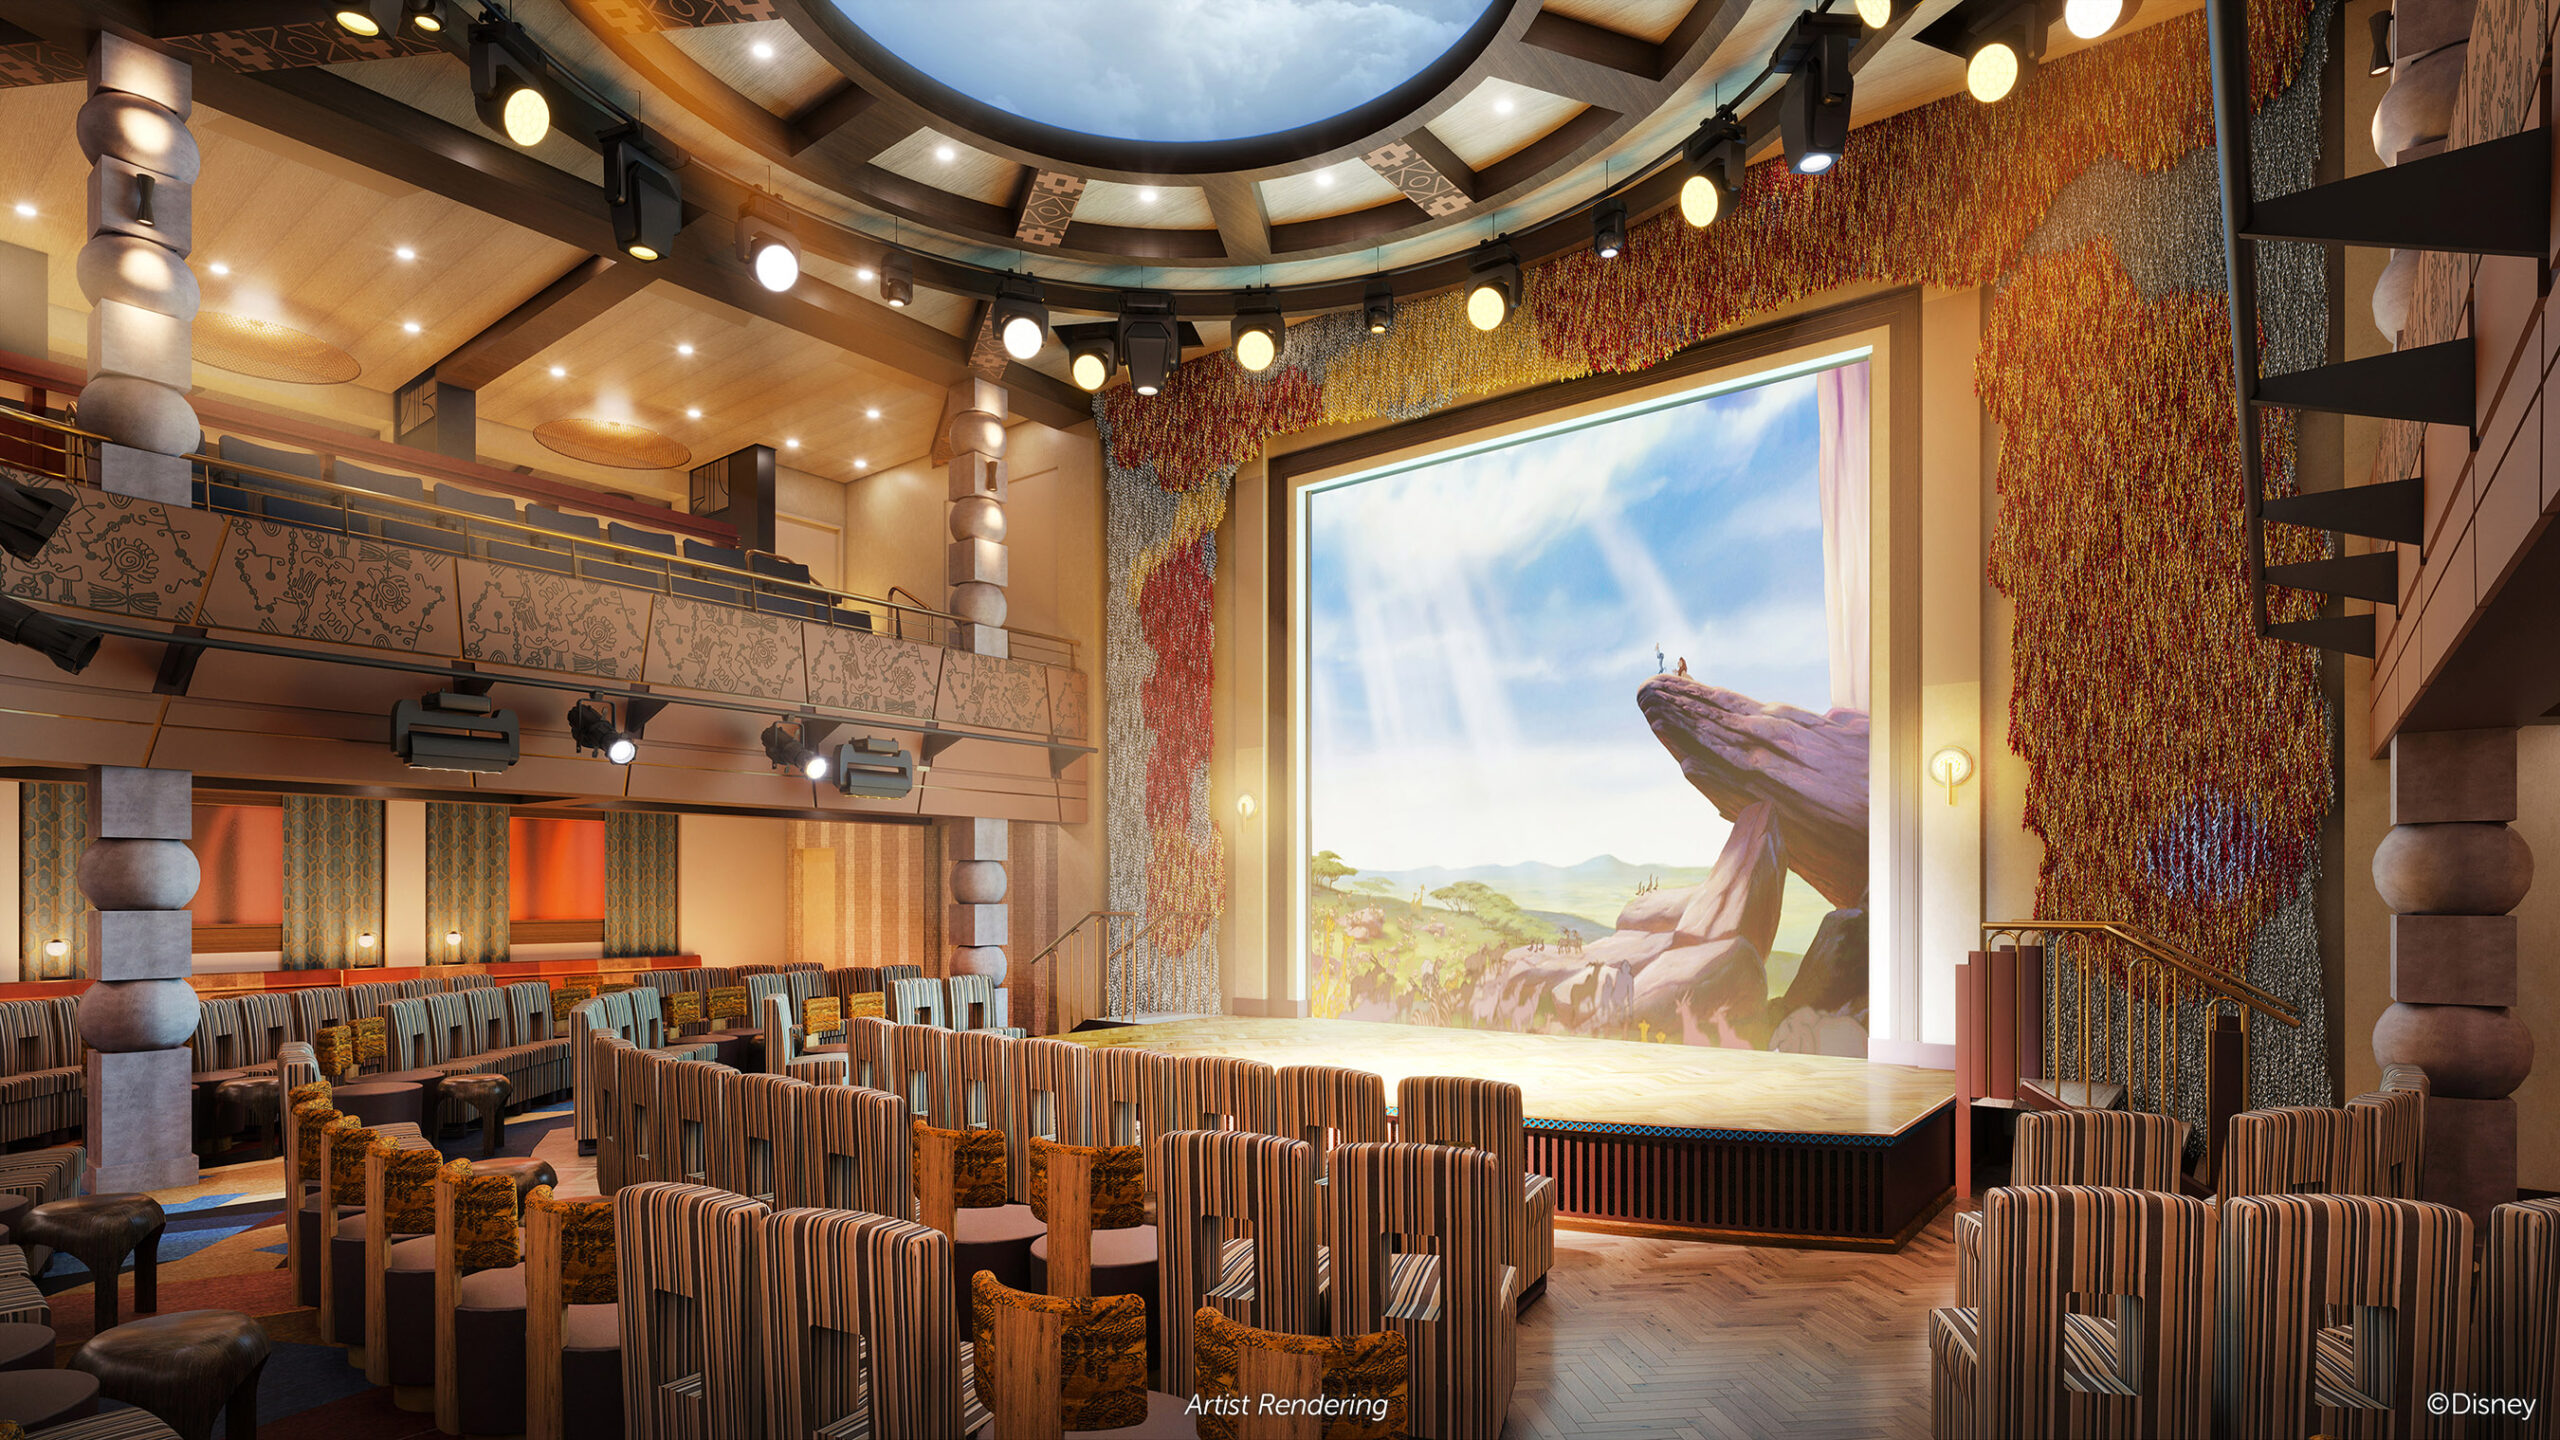 Named for the lioness matriarch from Disney’s “The Lion King,” Sarabi will be a central hub for a multitude of daytime